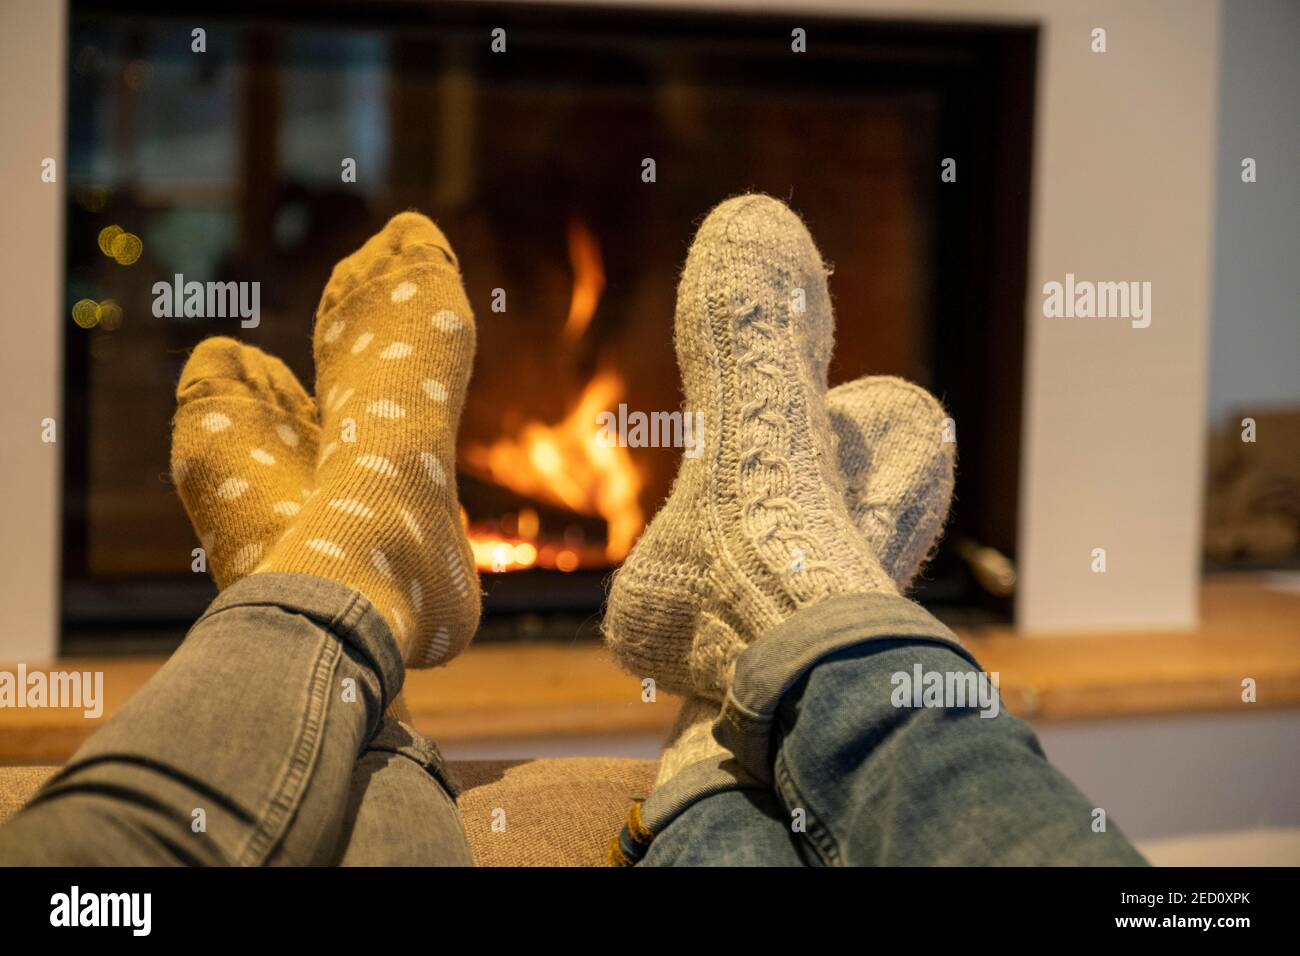 Feet with cuddly socks in front of a fireplace, winter, Bavaria, Germany Stock Photo